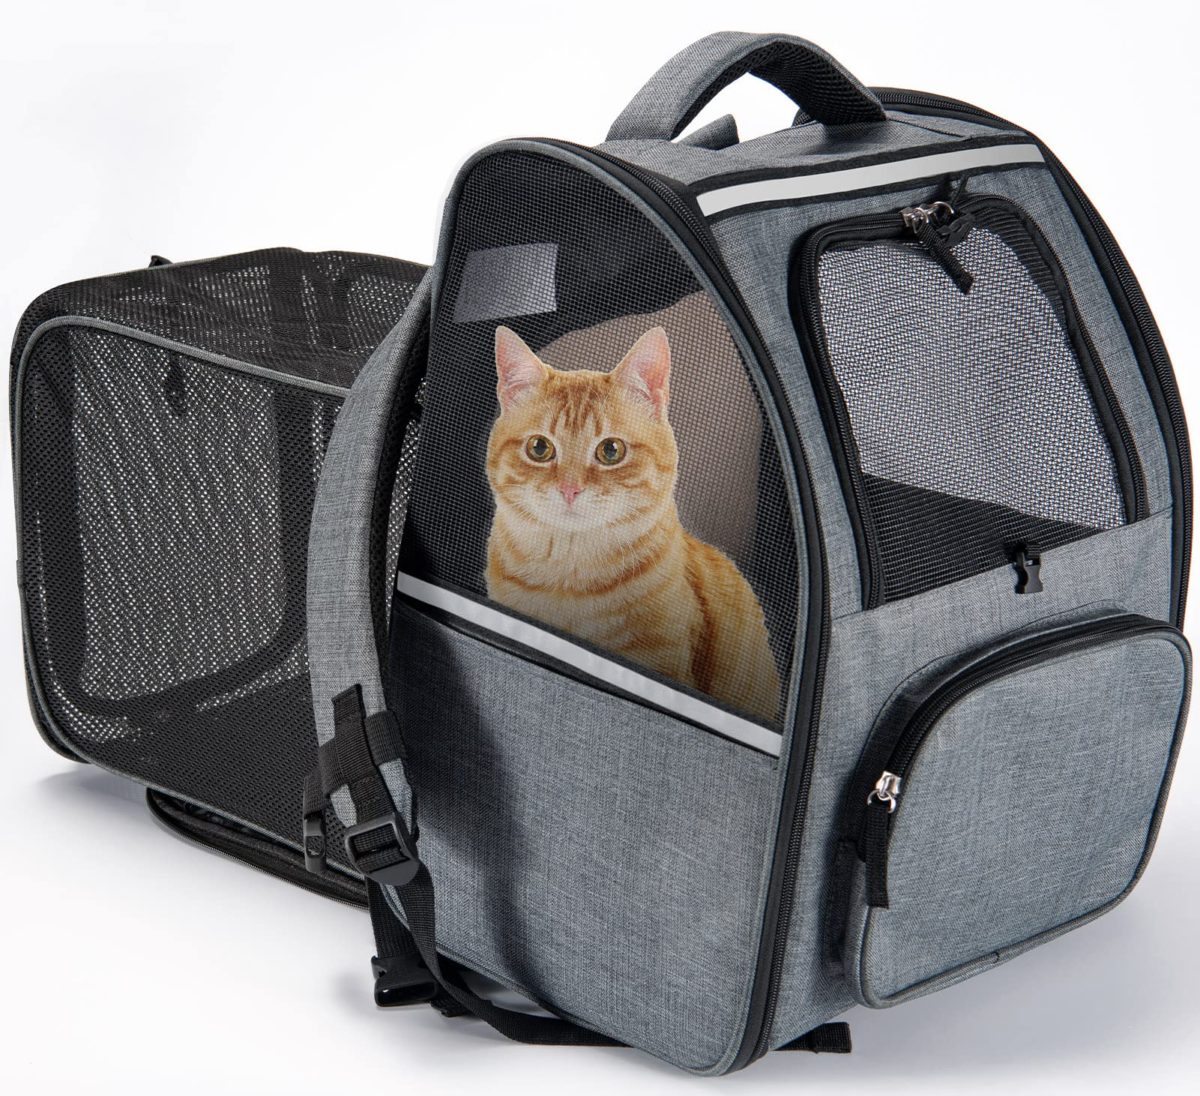 Cat Backpack Carrier for Hiking Camping&Outdoor Use